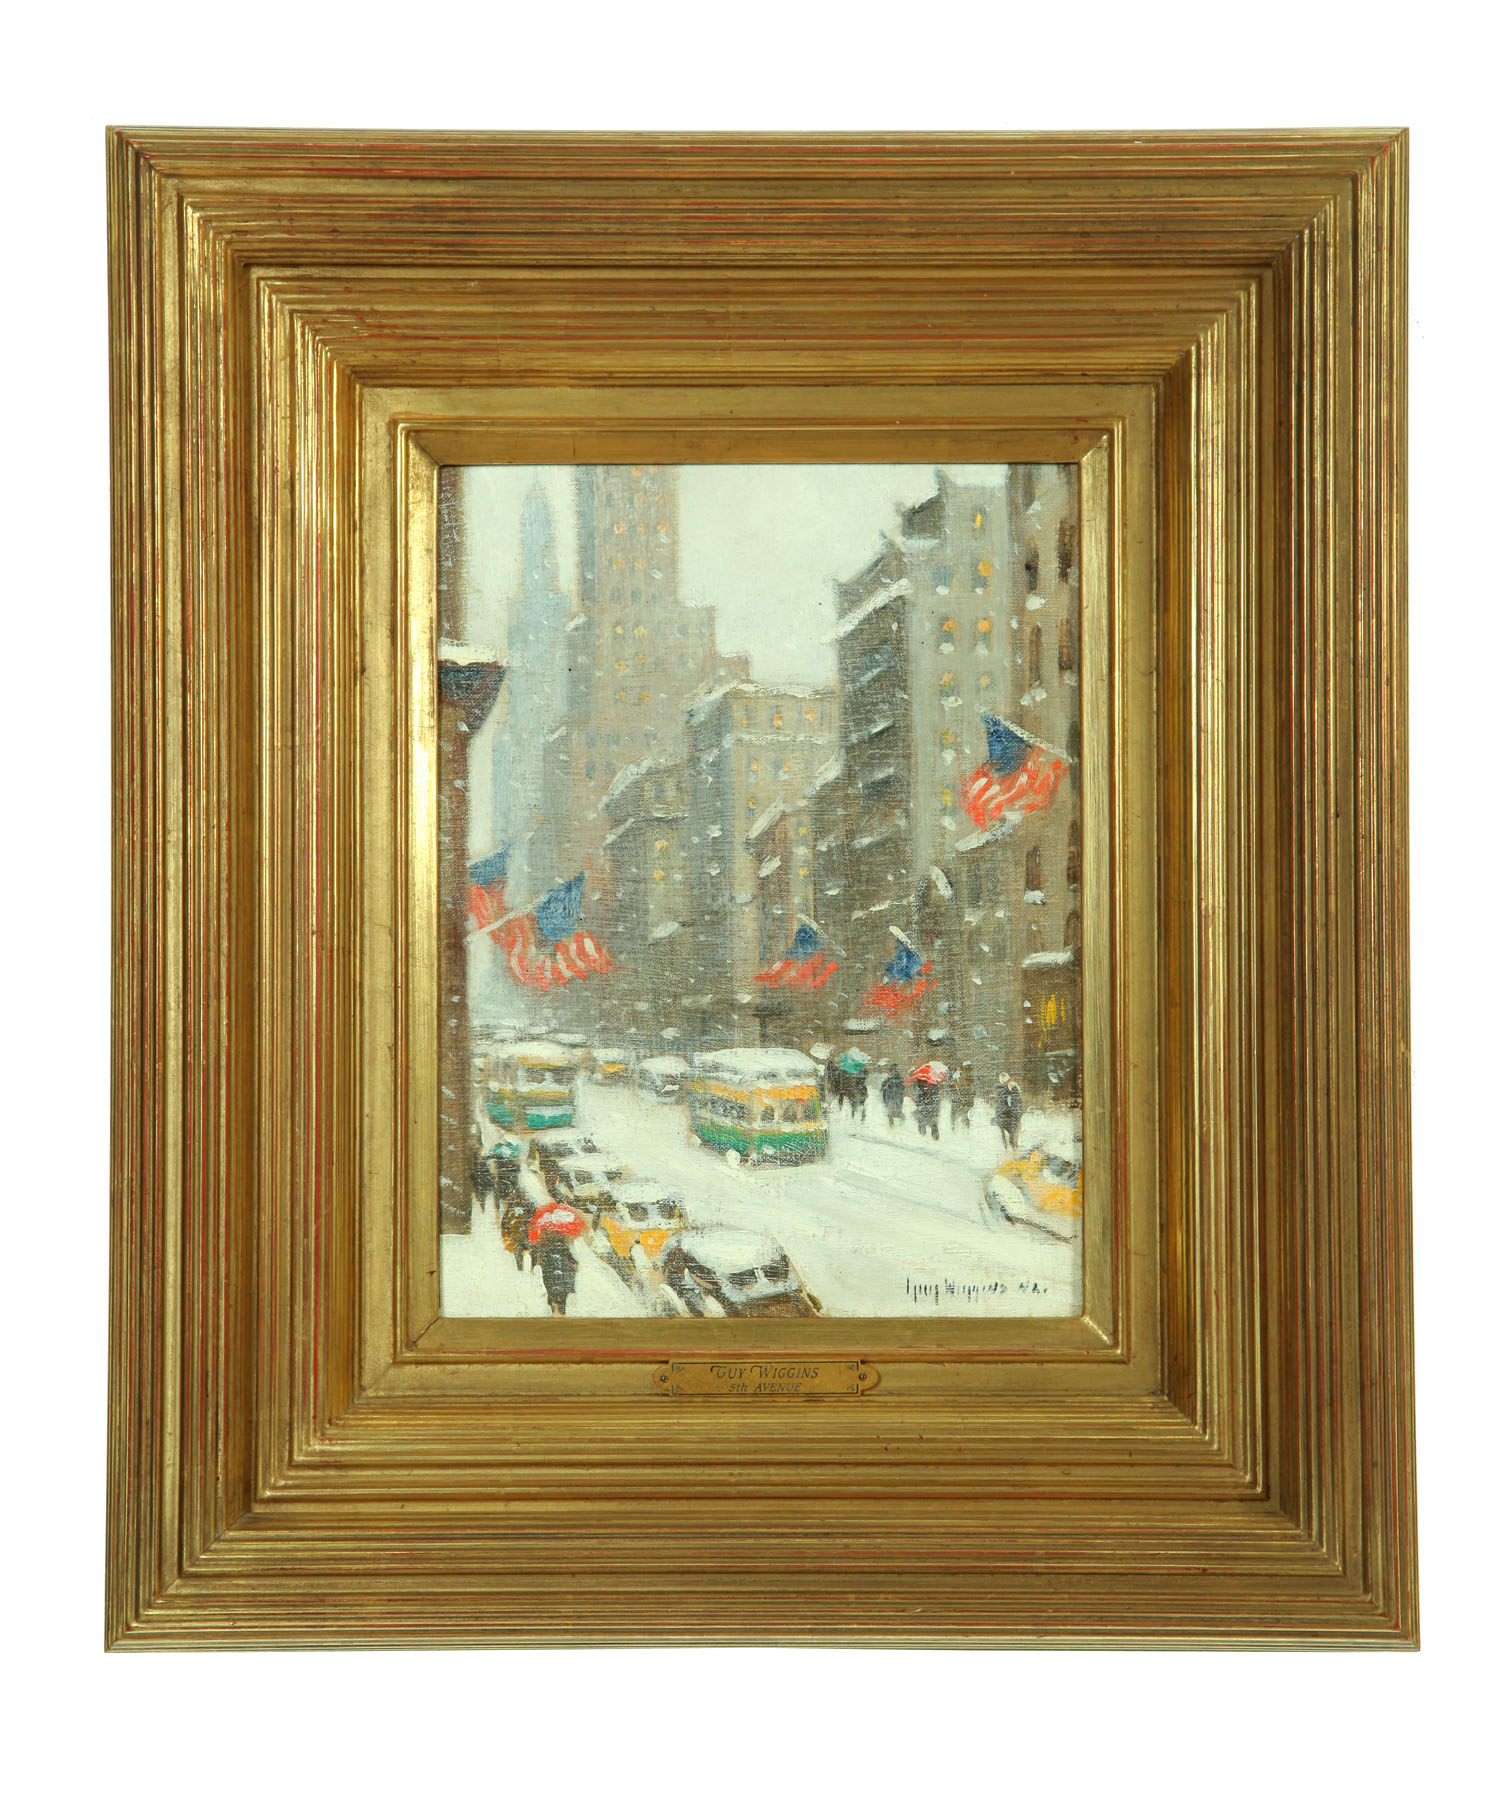 LOOKING DOWN 5TH AVE. BY GUY CARLETON